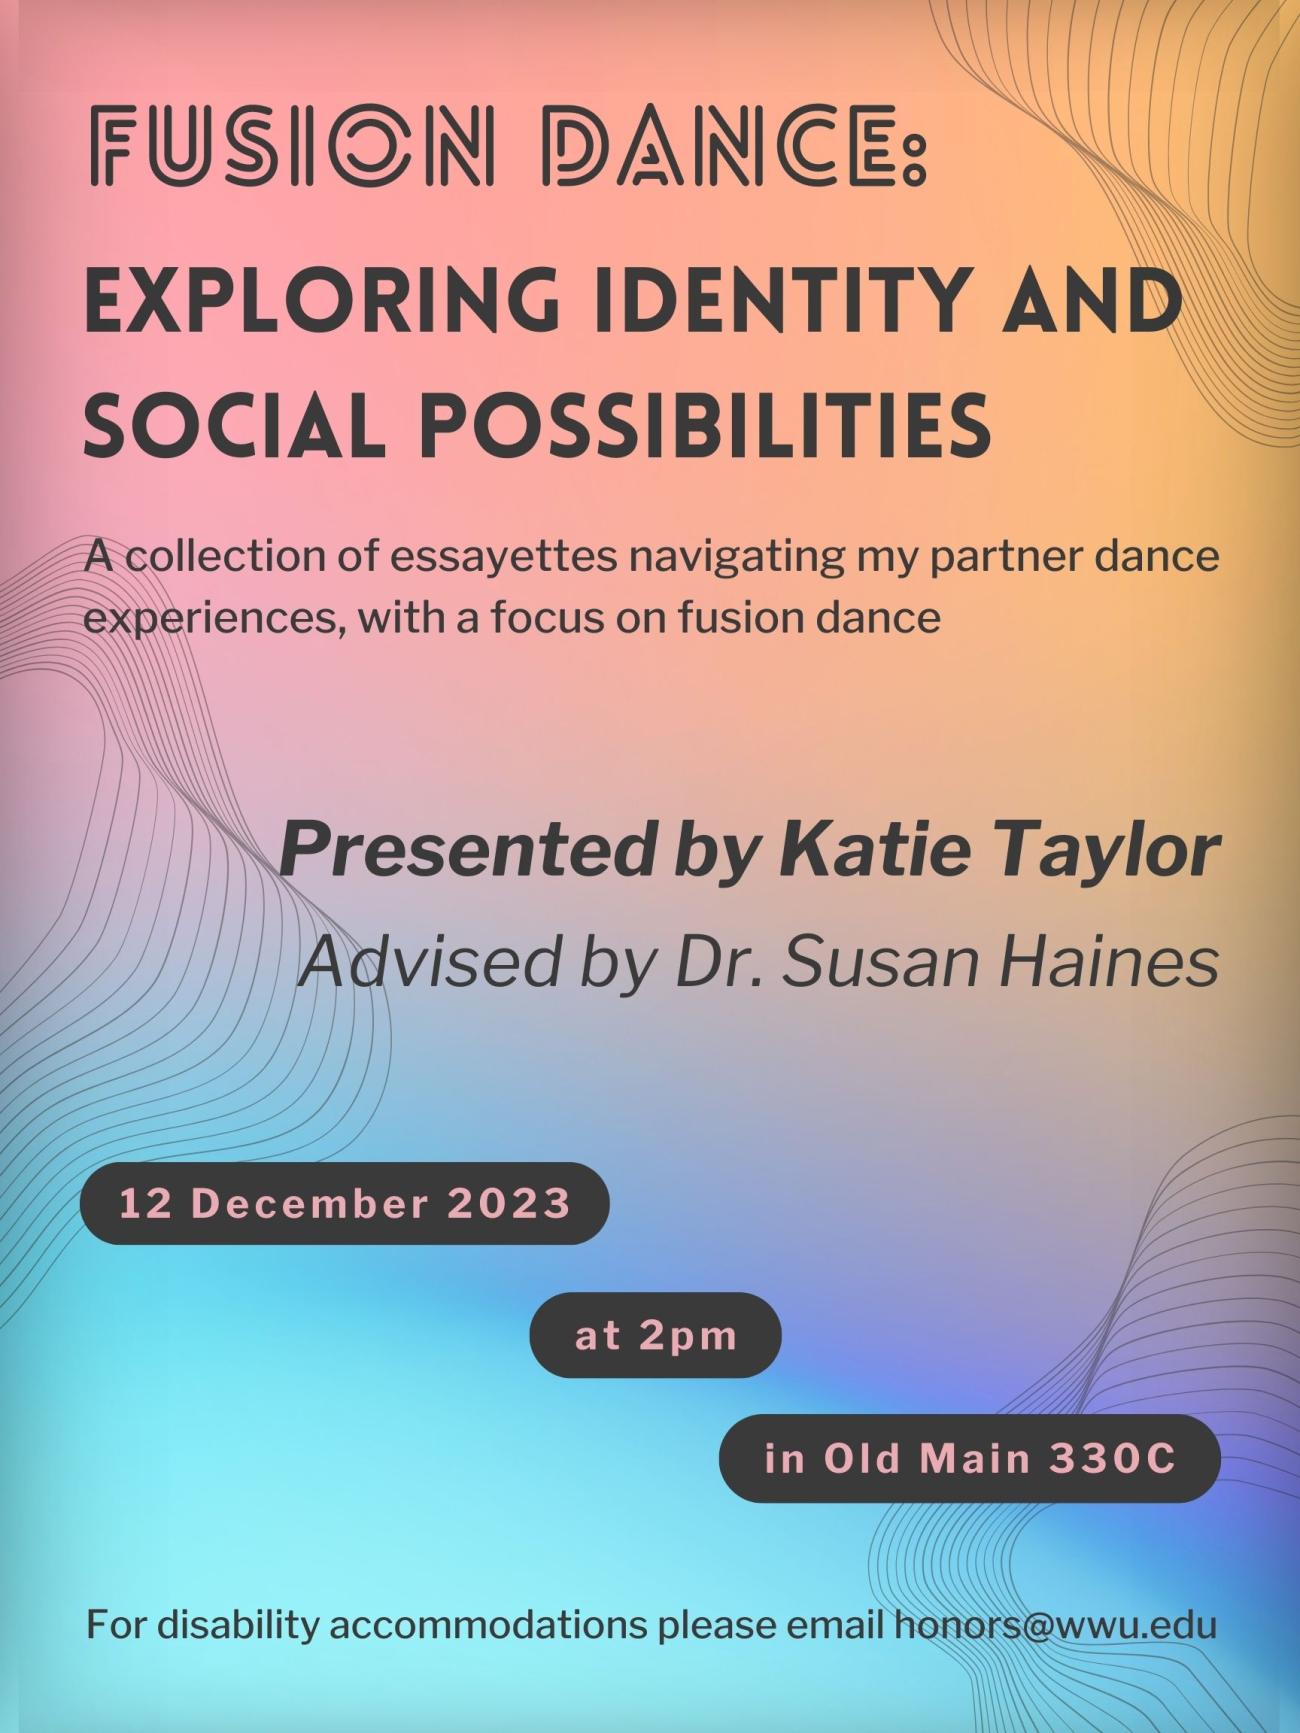 A poster with a background containing a fusion of colors: red, orange, indigo and light blue, blending softly into one another around their edges. The text reads: “Fusion Dance: Exploring Identity and Social Possibilities. A collection of essayettes navigating my partner dance experiences, with a focus on fusion dance. Presented by Katie Taylor. Advised by Dr. Susan Haines. 12 December 2023 at 2pm in Old Main 330C. For disability accommodations please email honors@wwu.edu”.